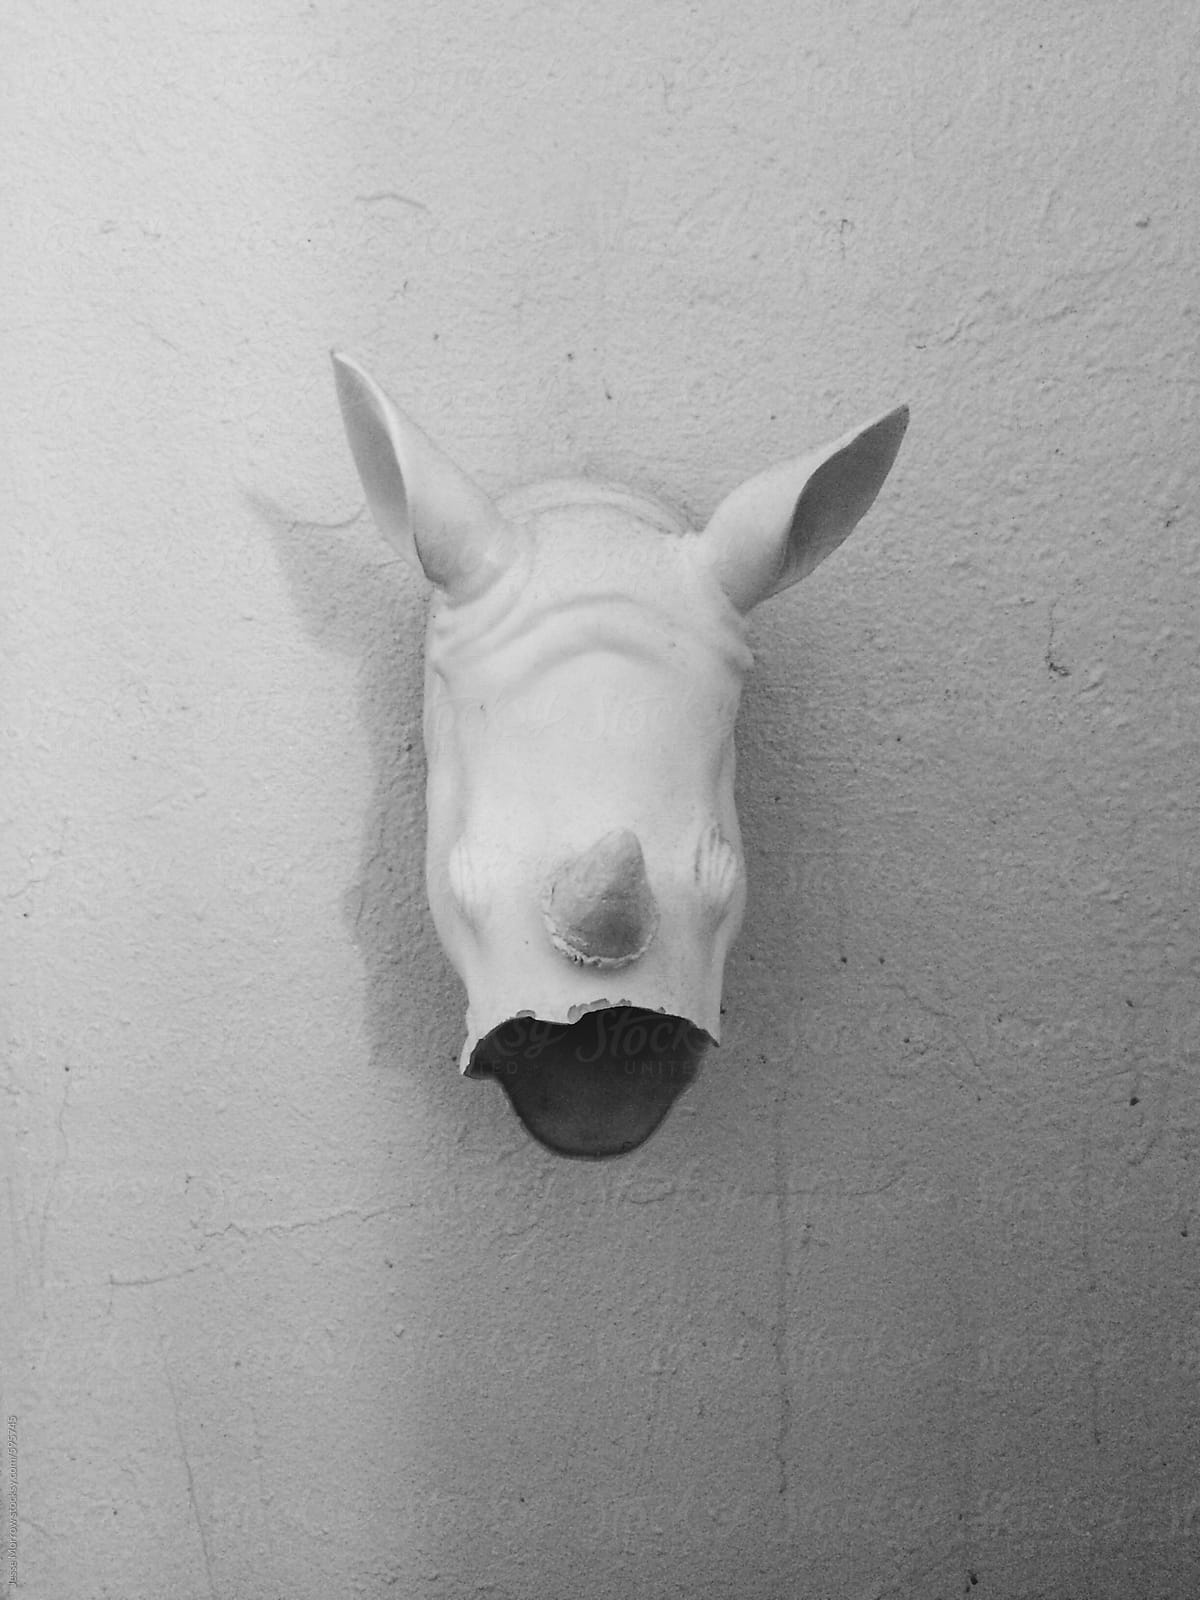 black and white image of rhino head on wall with missing horn